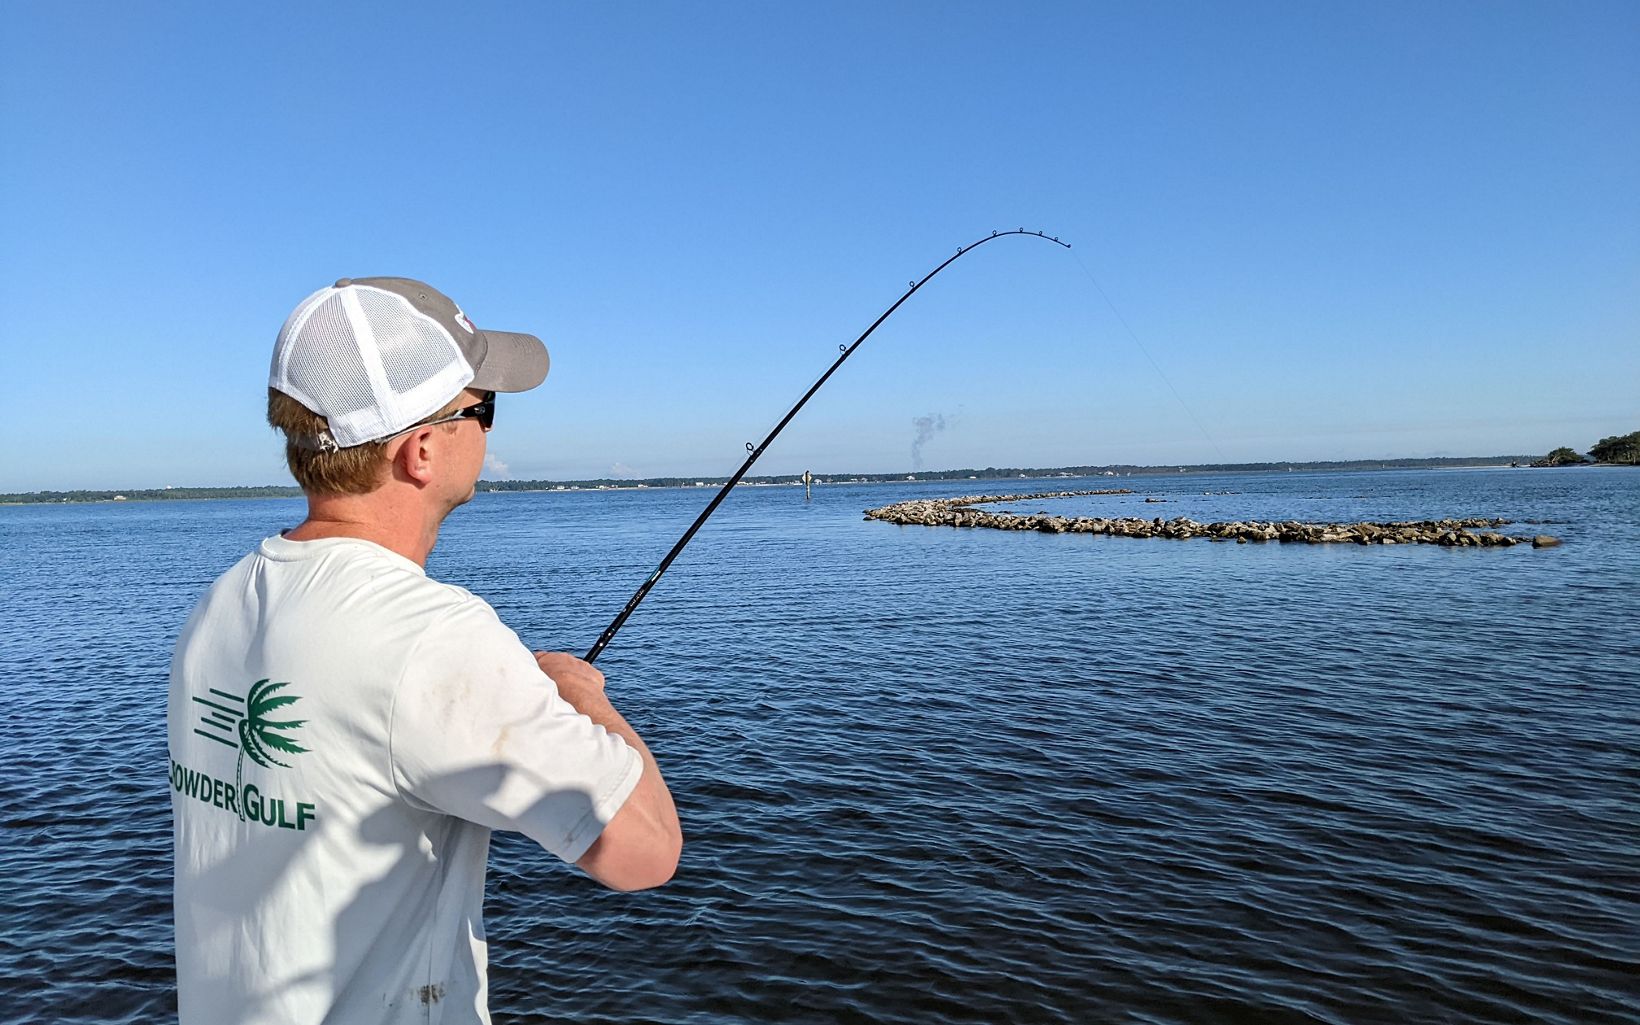 A man fishes from a boat with his rod bent towards the newly constructed oyster reefs. 